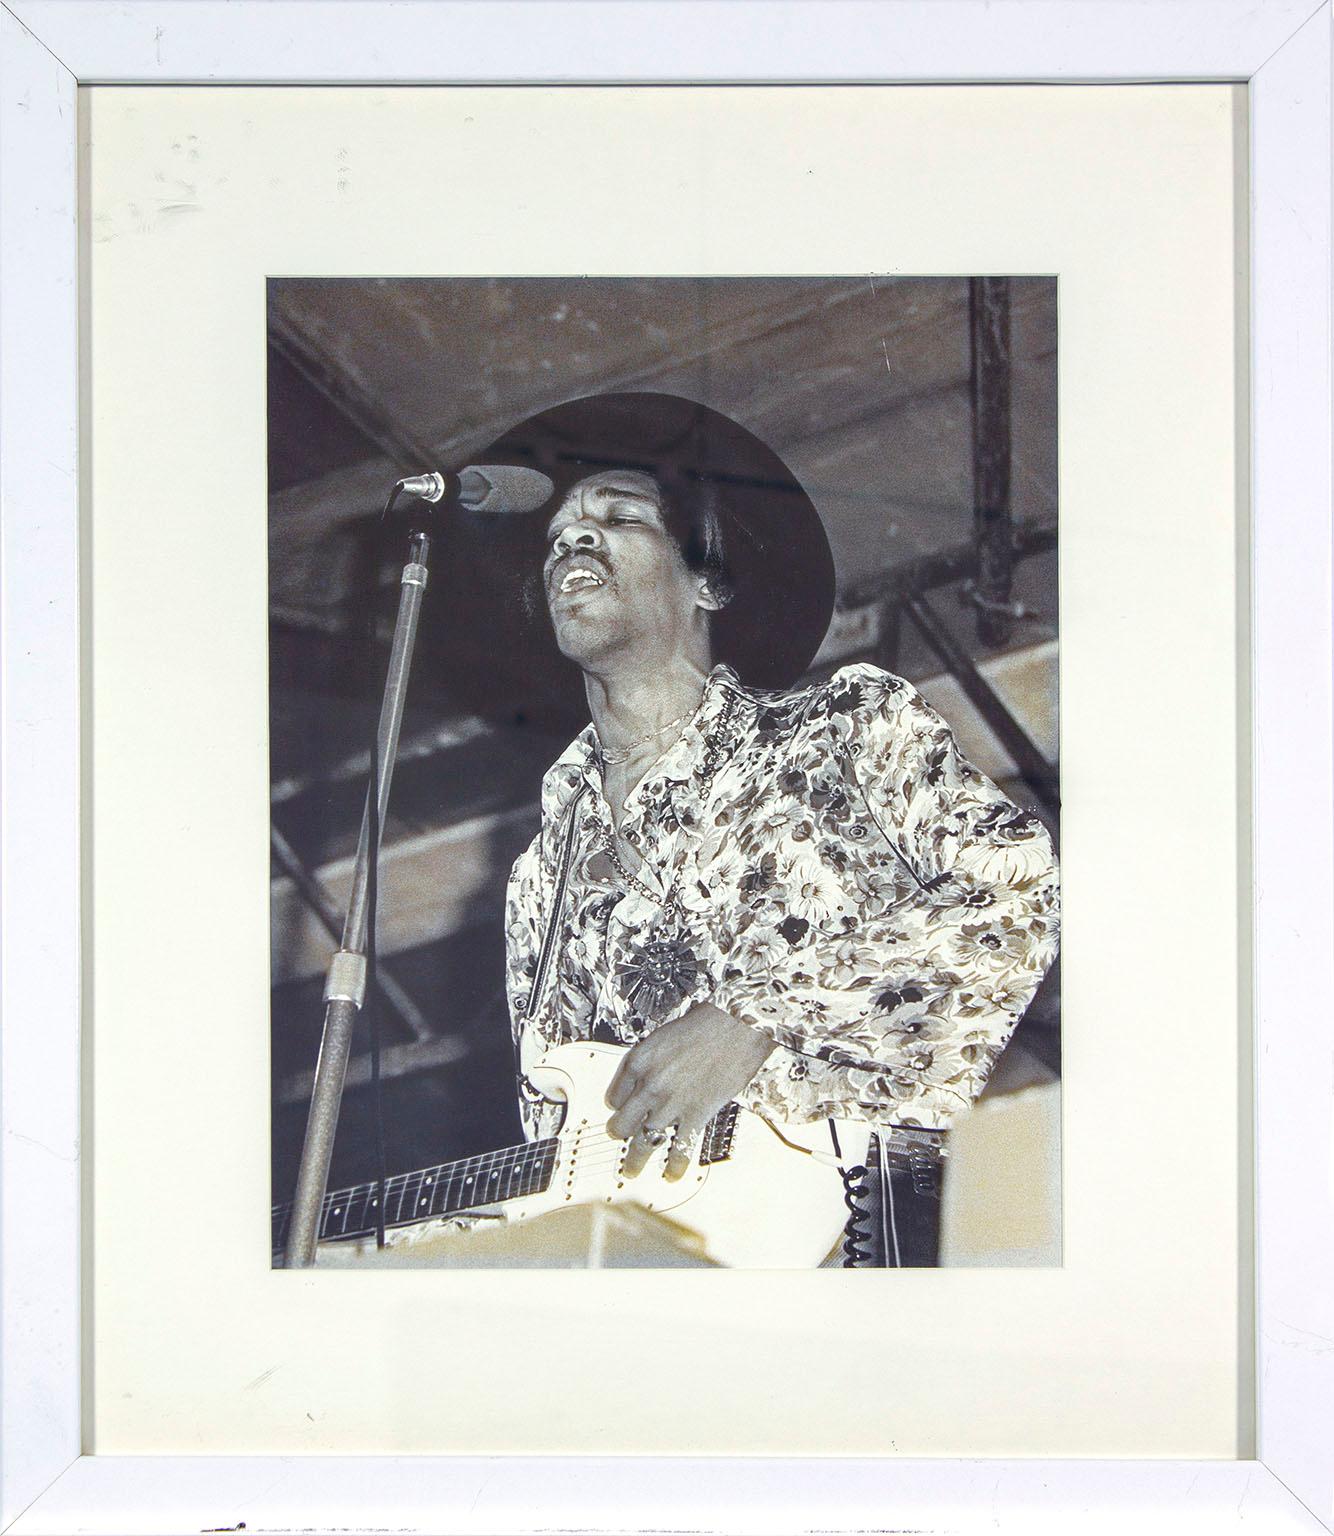 Michael Putland Black and White Photograph - "Jimi Hendrix" framed photograph from Hard Rock Hotel and Casino in Las Vegas